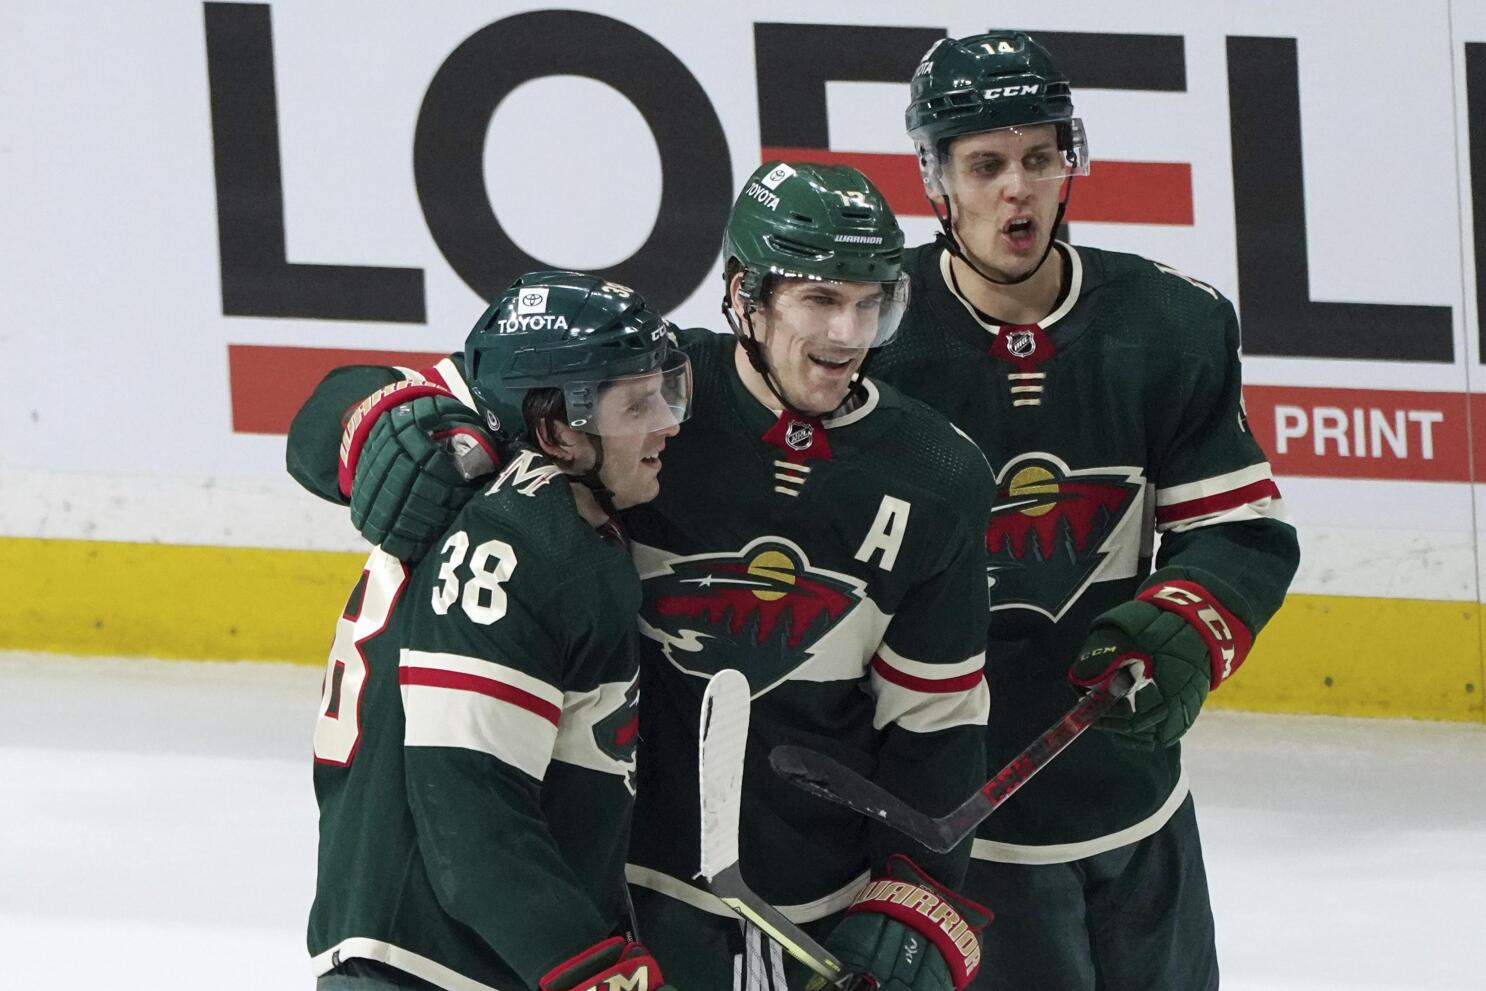 Tyson Jost looking forward to increased opportunity with Wild